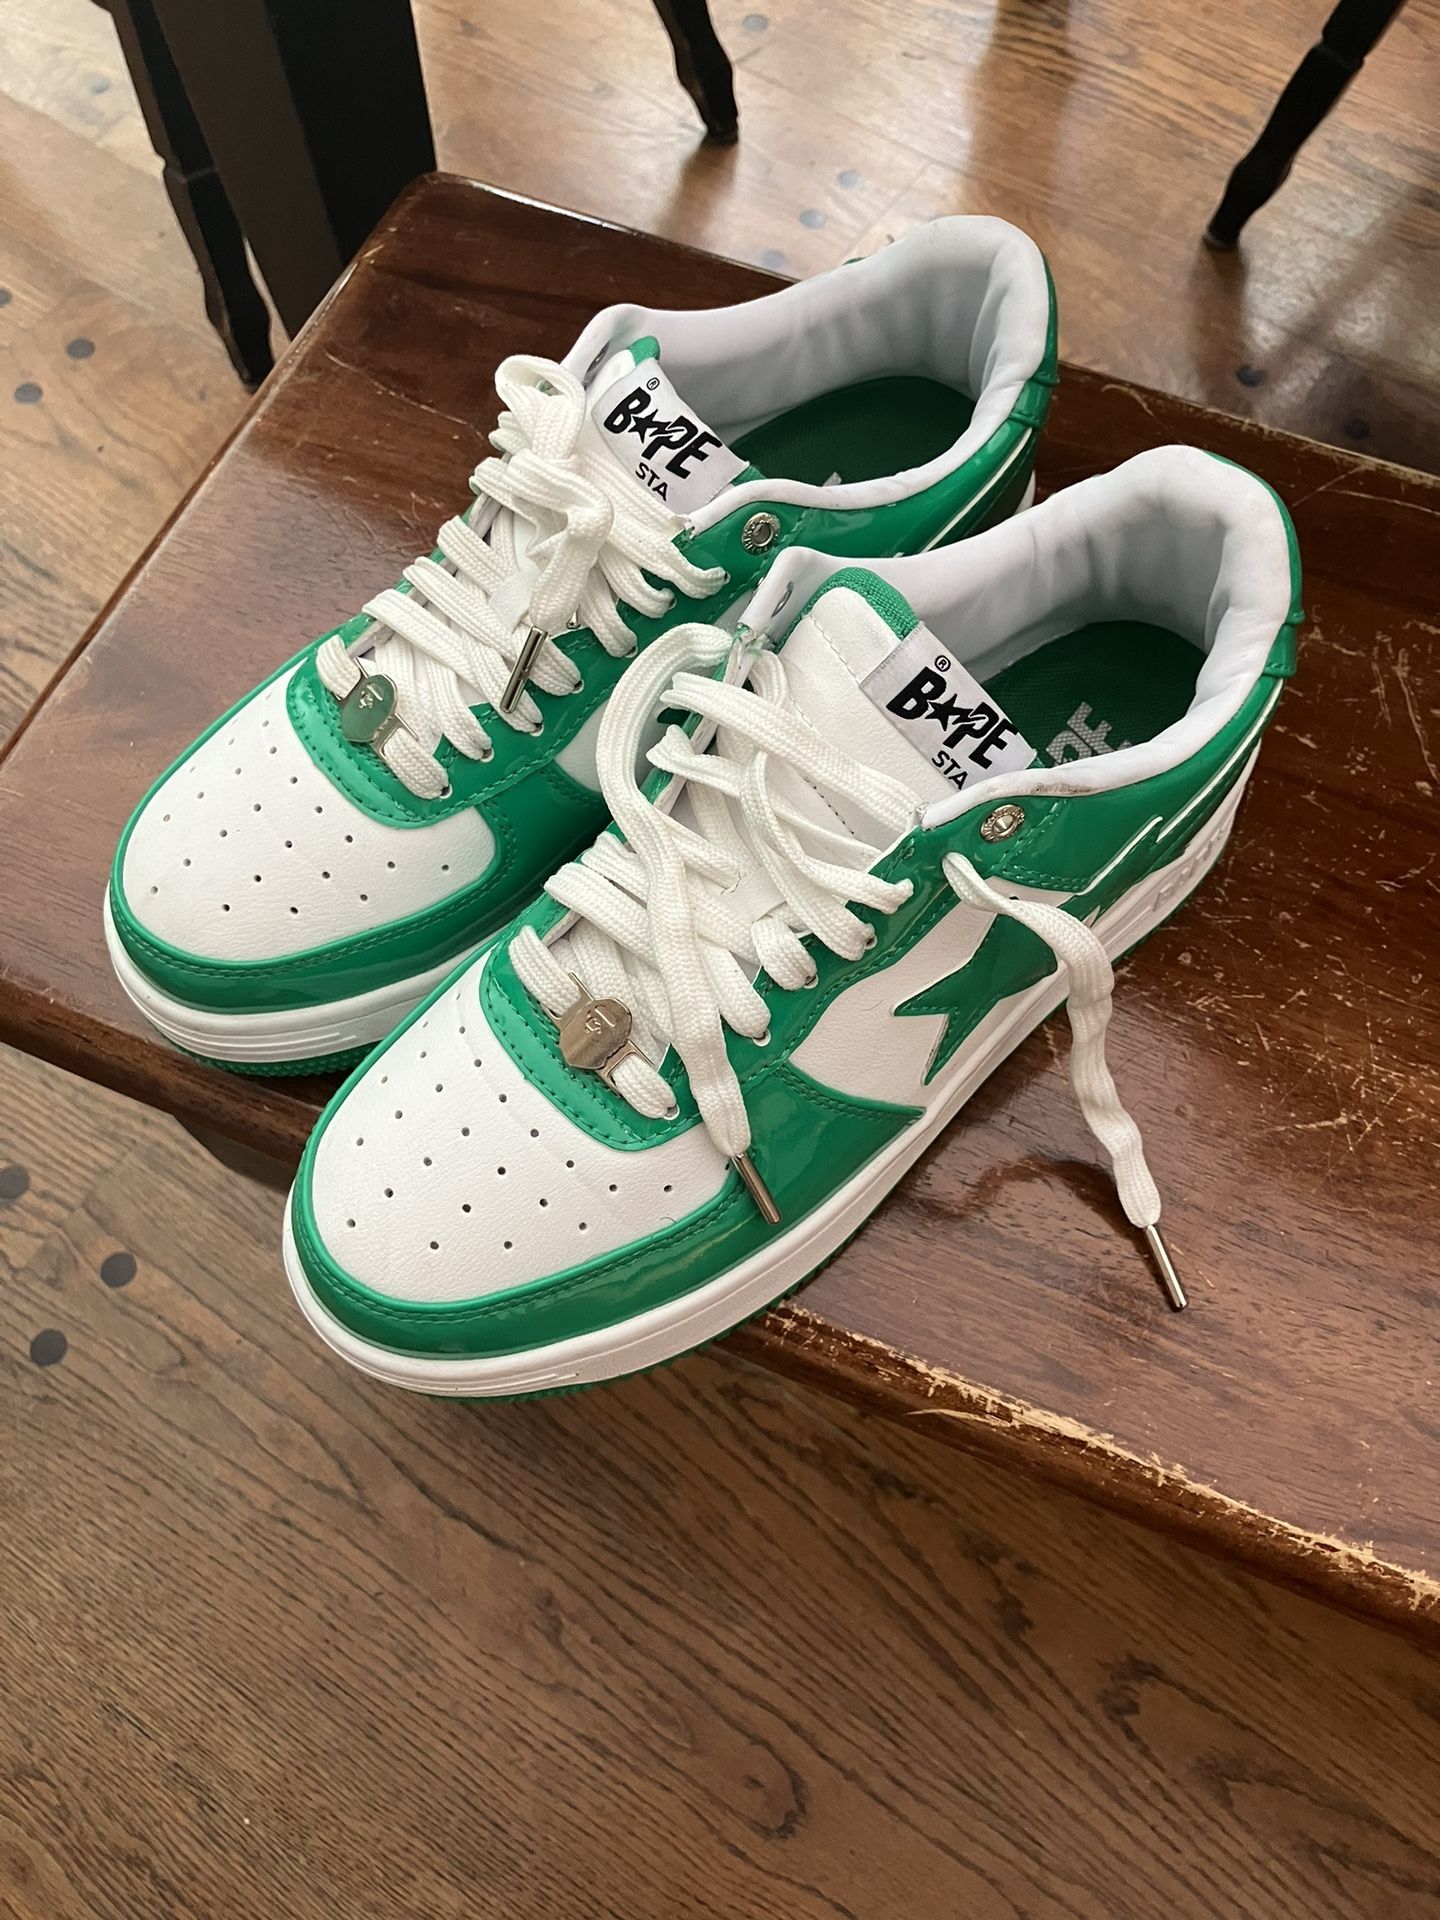 Bathing Ape Sta Shoes- Green, Size 8.5, Worn Once 